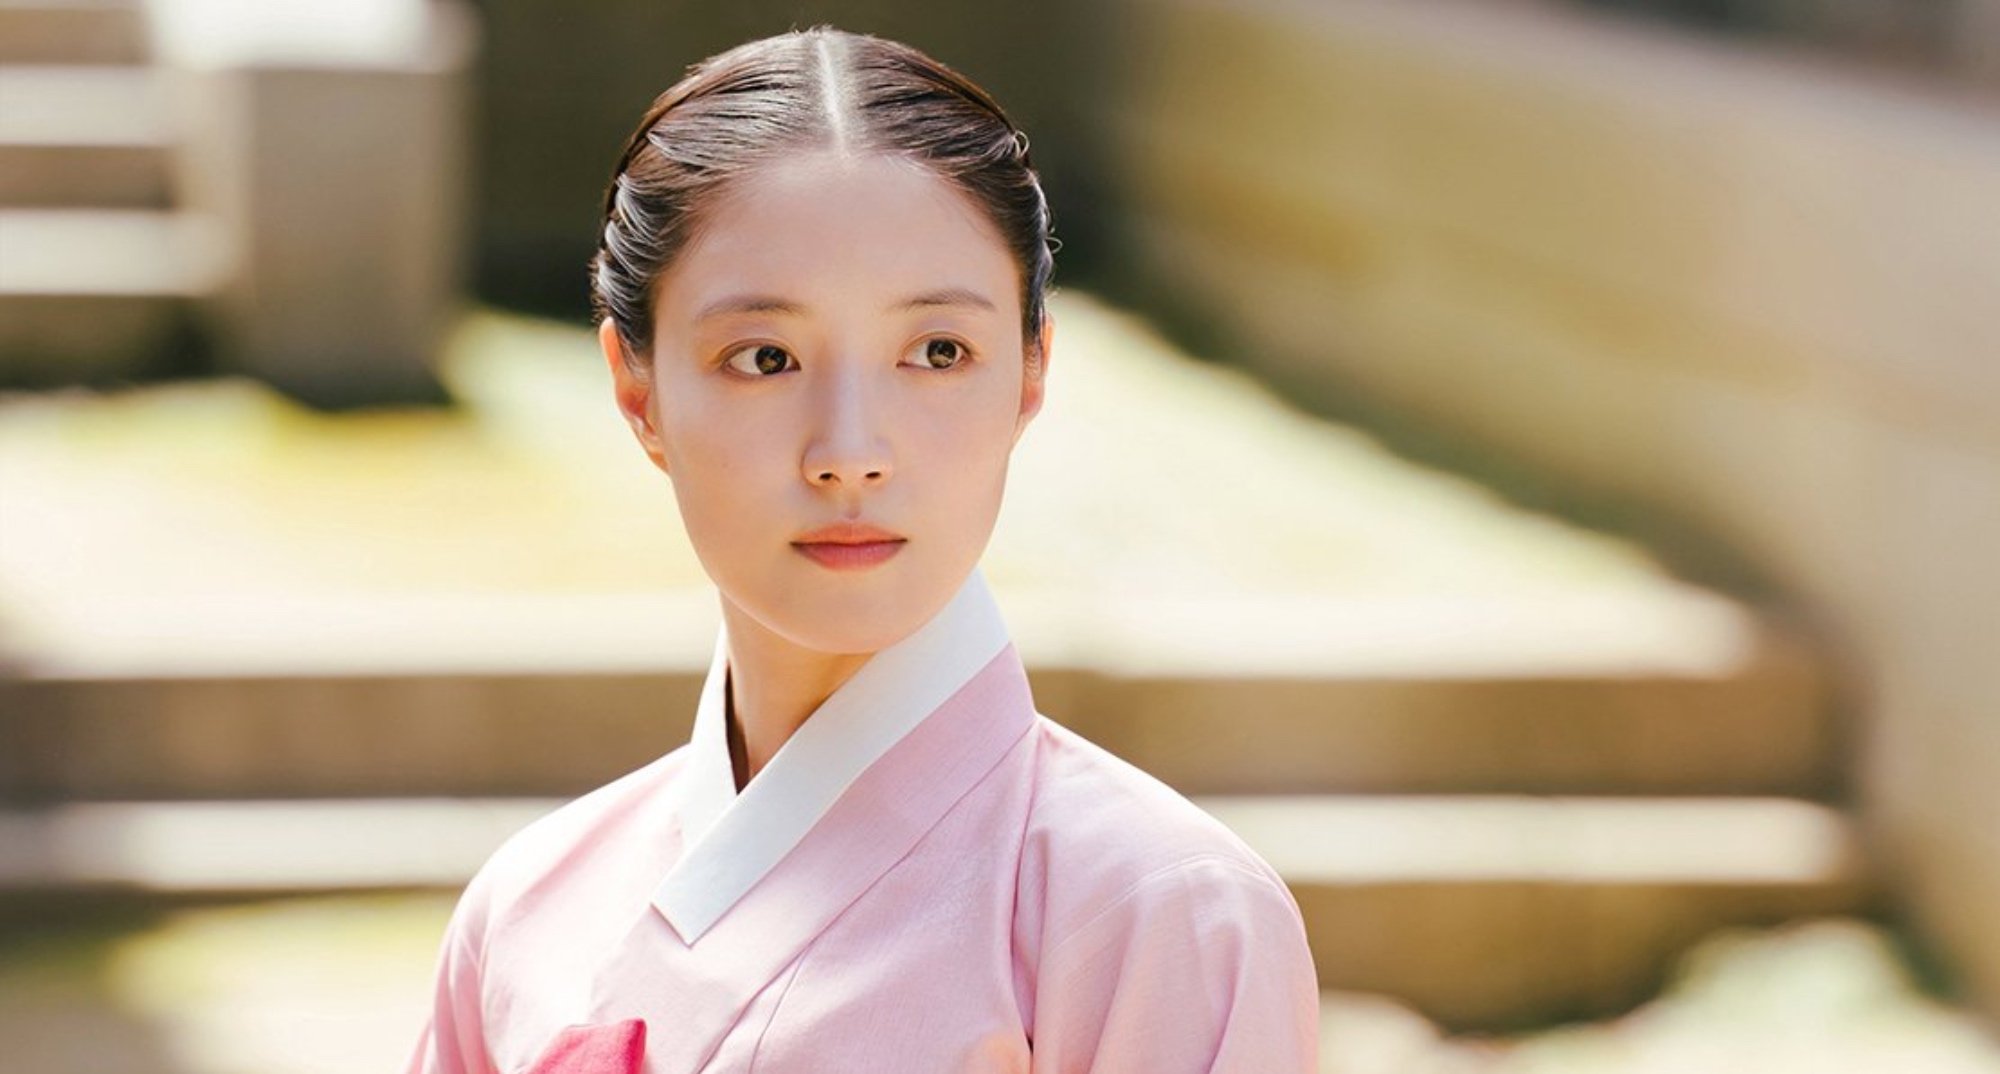 Lee Se-young in 'The Red Sleeve' K-drama as Deok-im wearing pink hanbok.